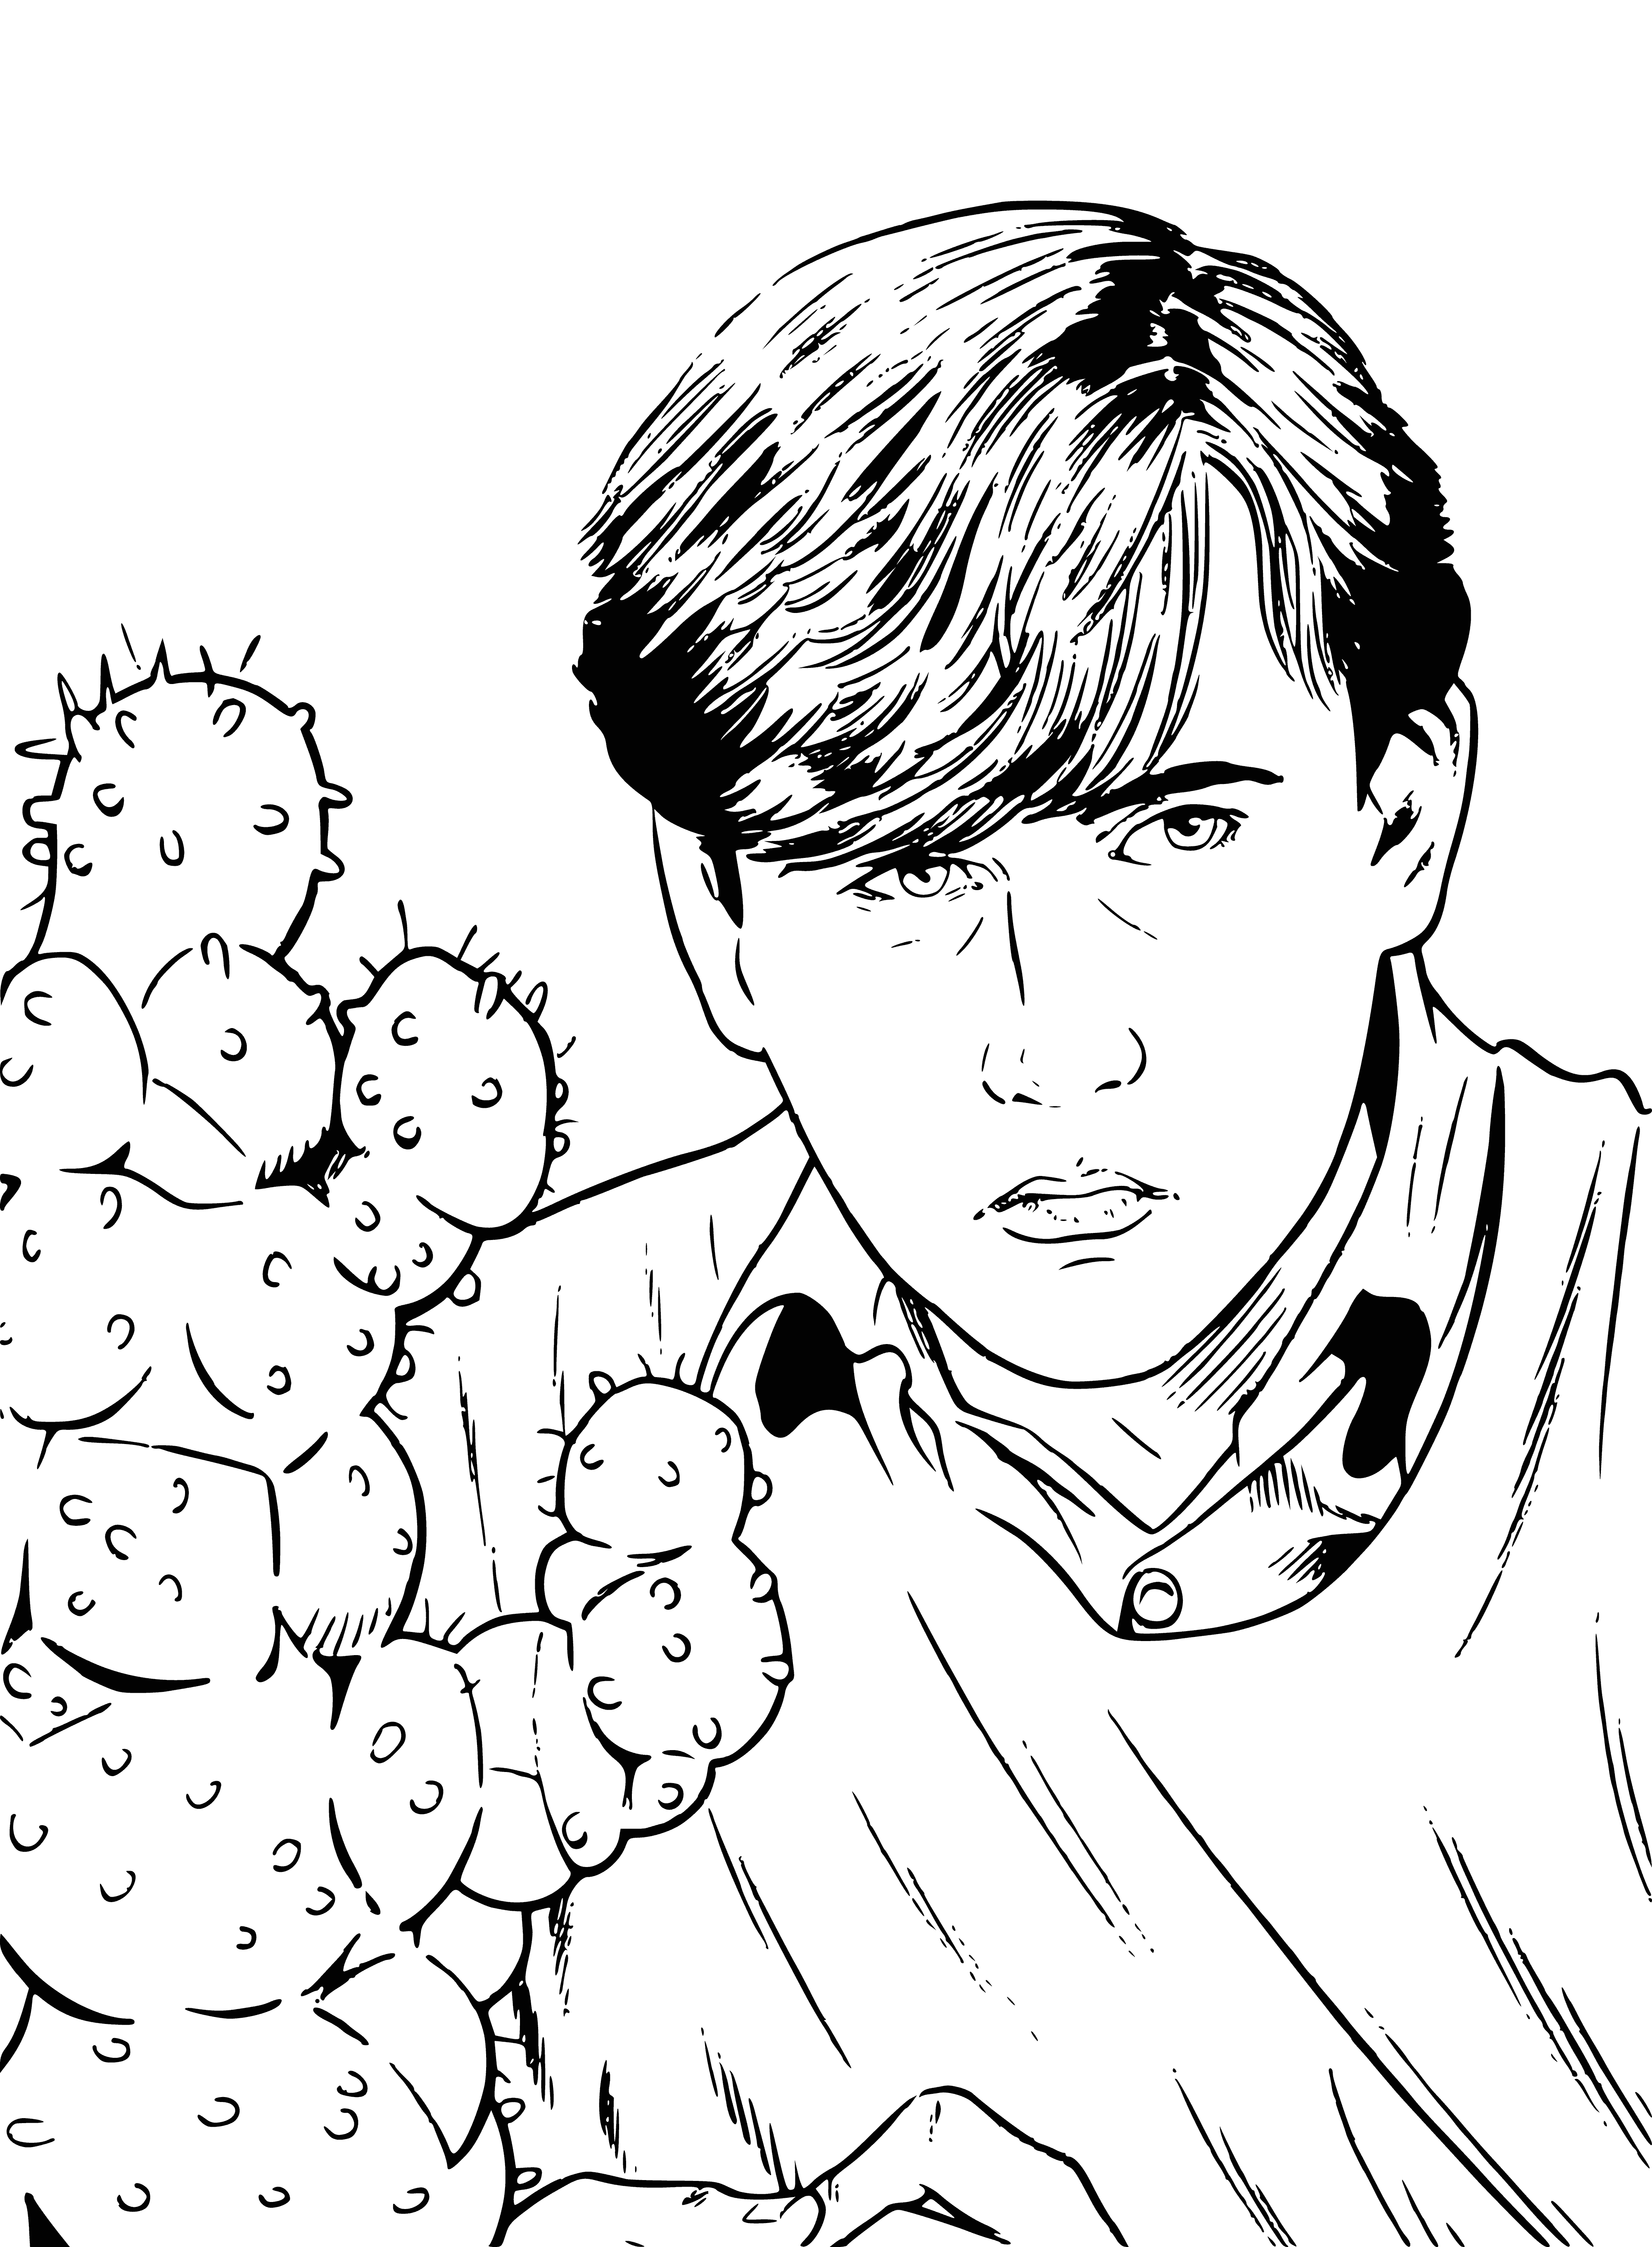 Neville Longbottom coloring page